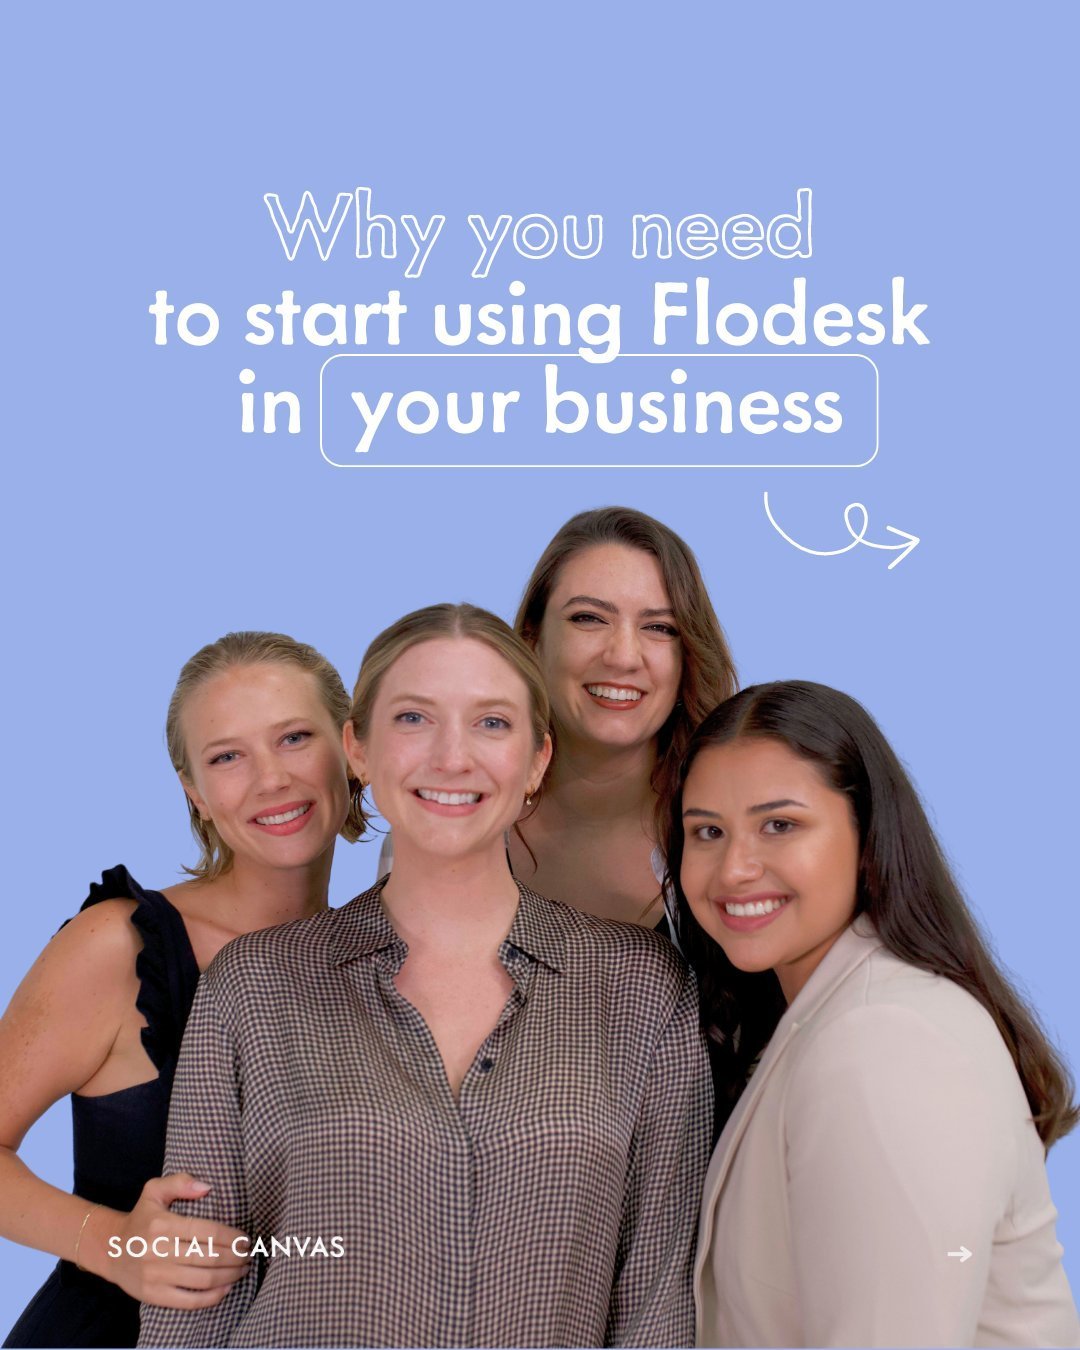 💌 Here&rsquo;s why we love @Flodesk for email marketing! And a few reasons why you should make the switch to our favorite tool.

The best part? Use our code at flodesk.com/c/SOCIALCANVAS to get 50% off your first year with Flodesk!

What tools power